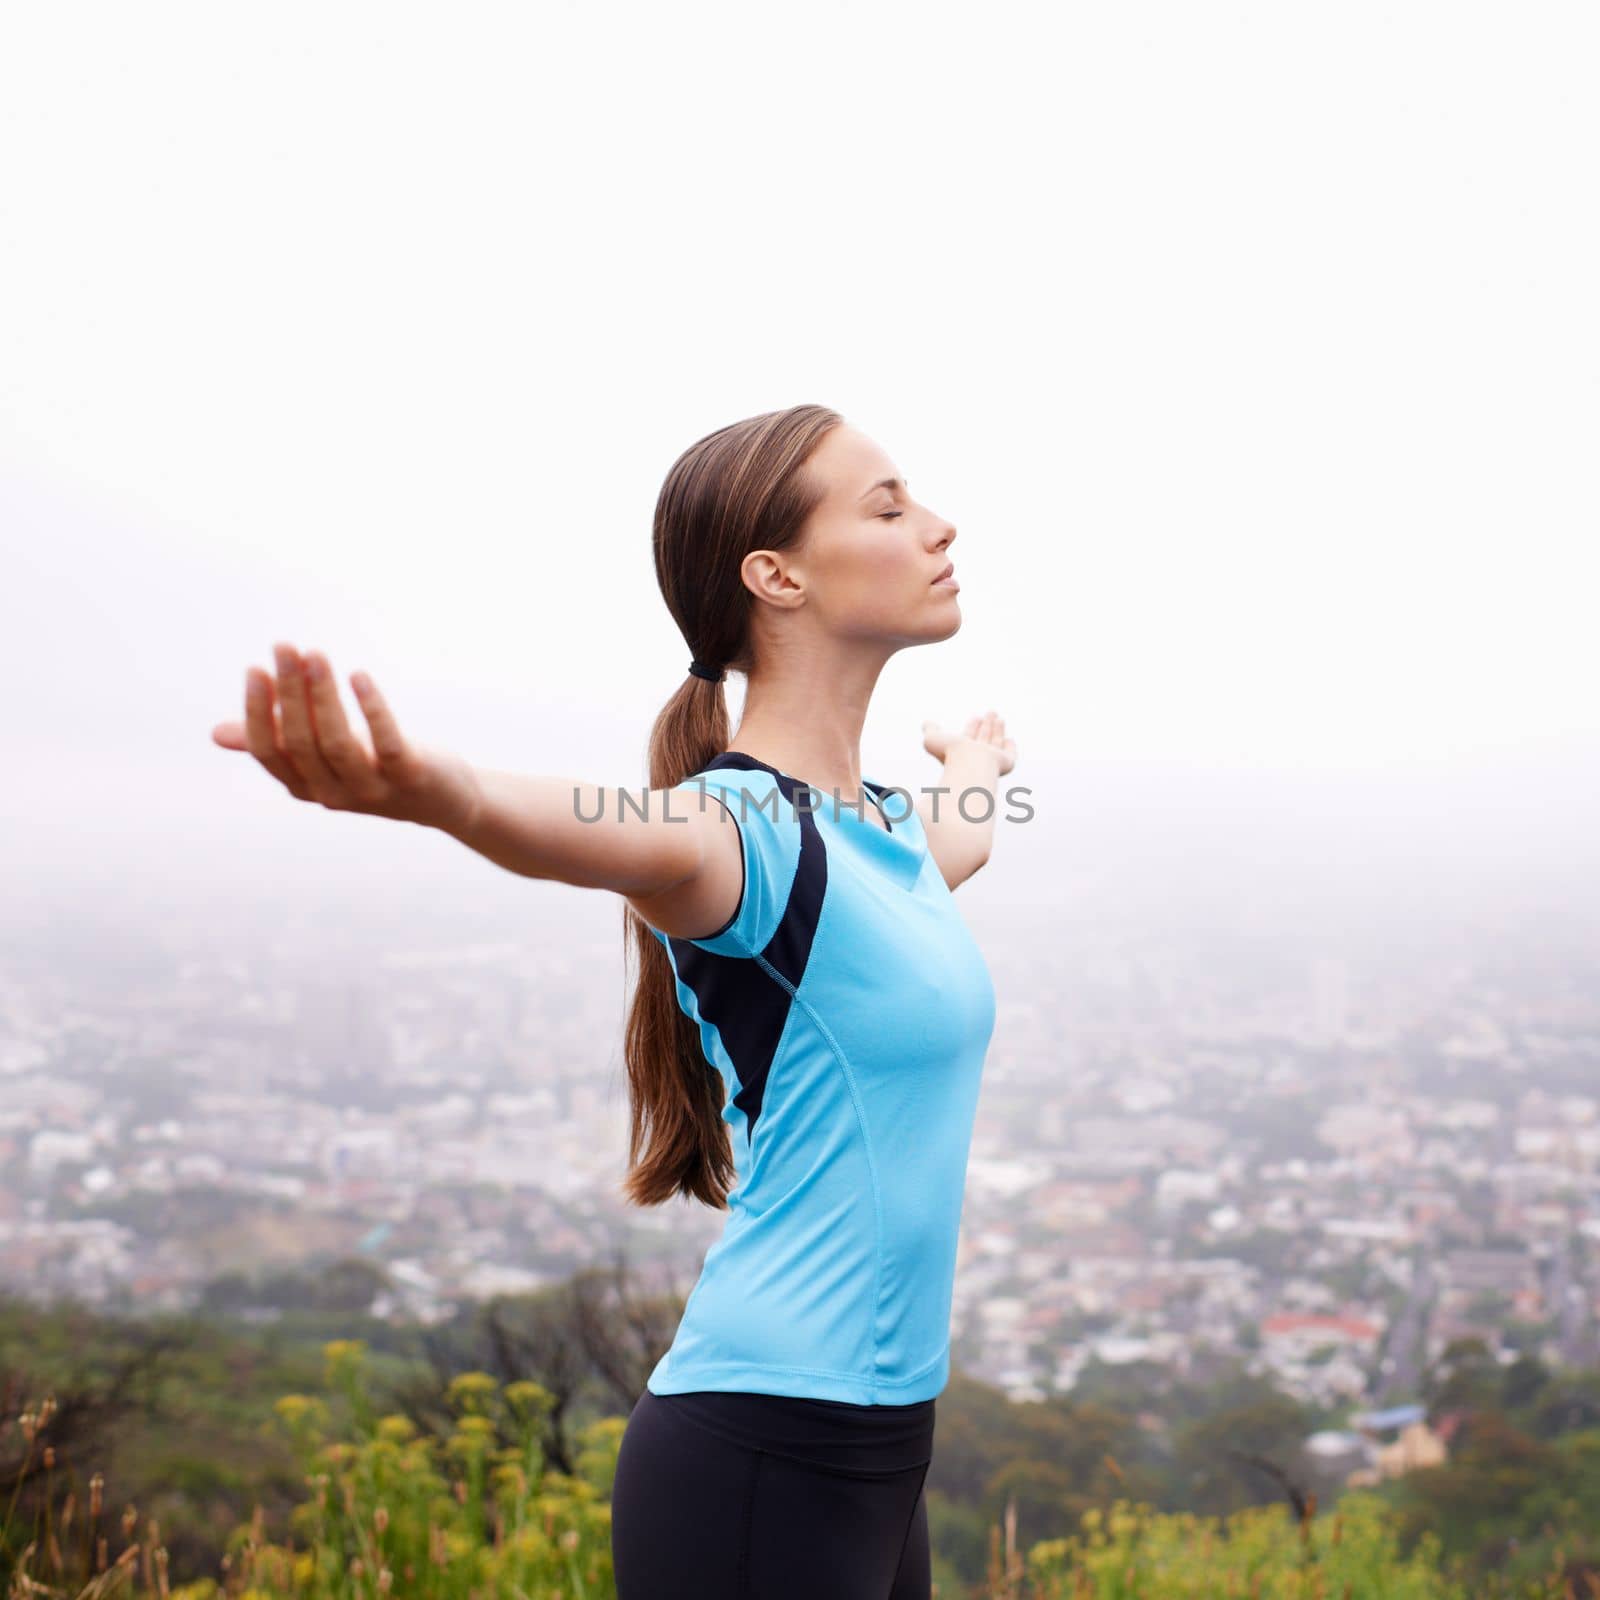 Feeling alive. a young woman training outdoors with her arms outstretched